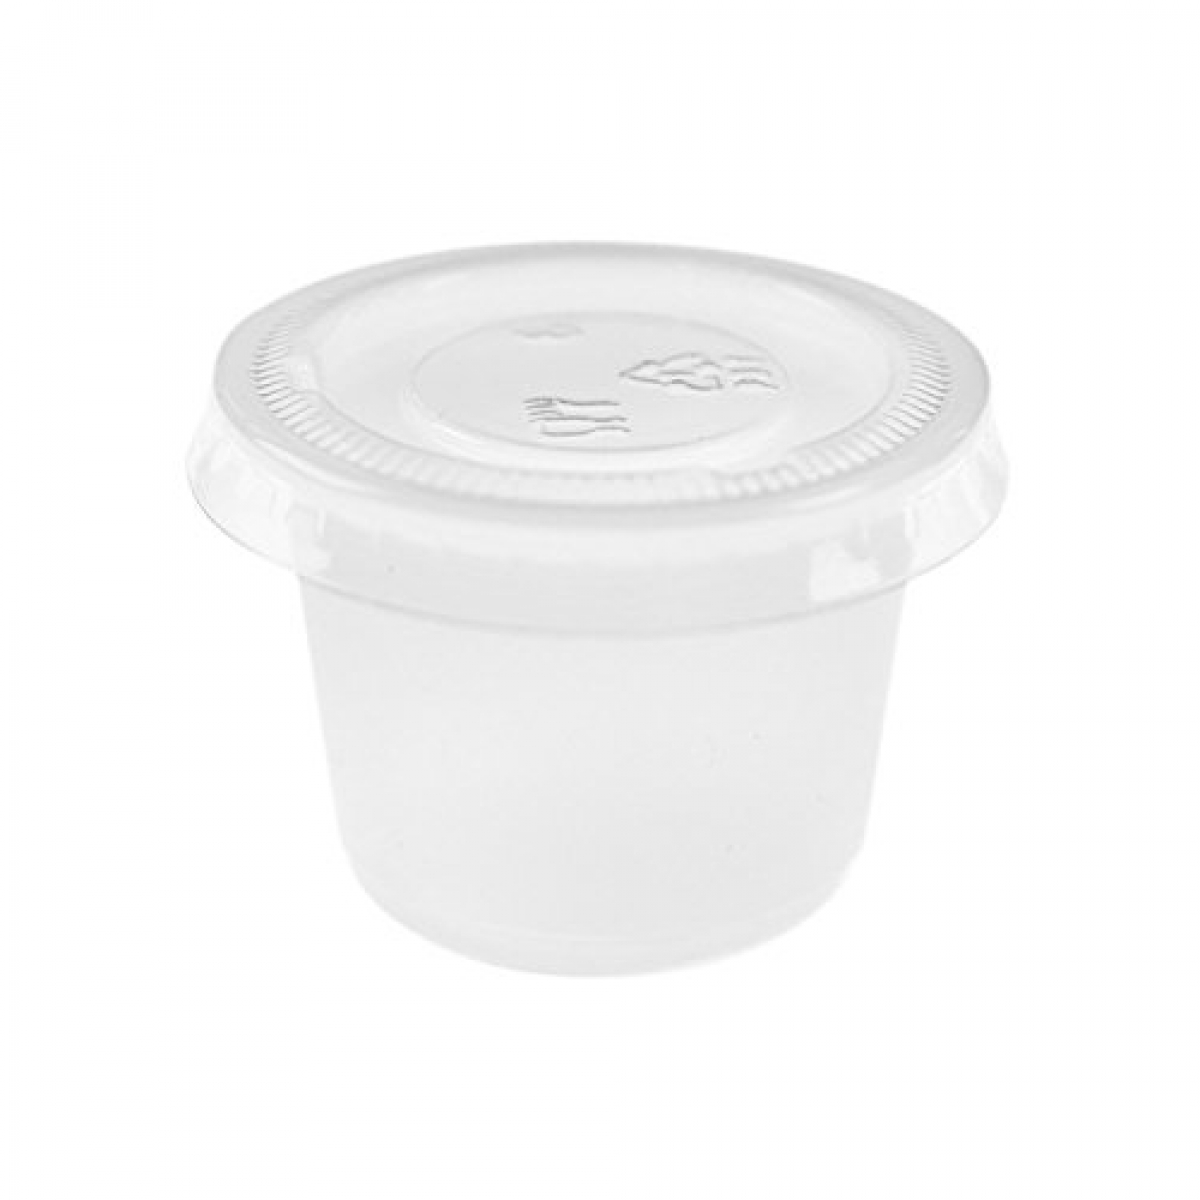 souffle container with clear lid 45*24